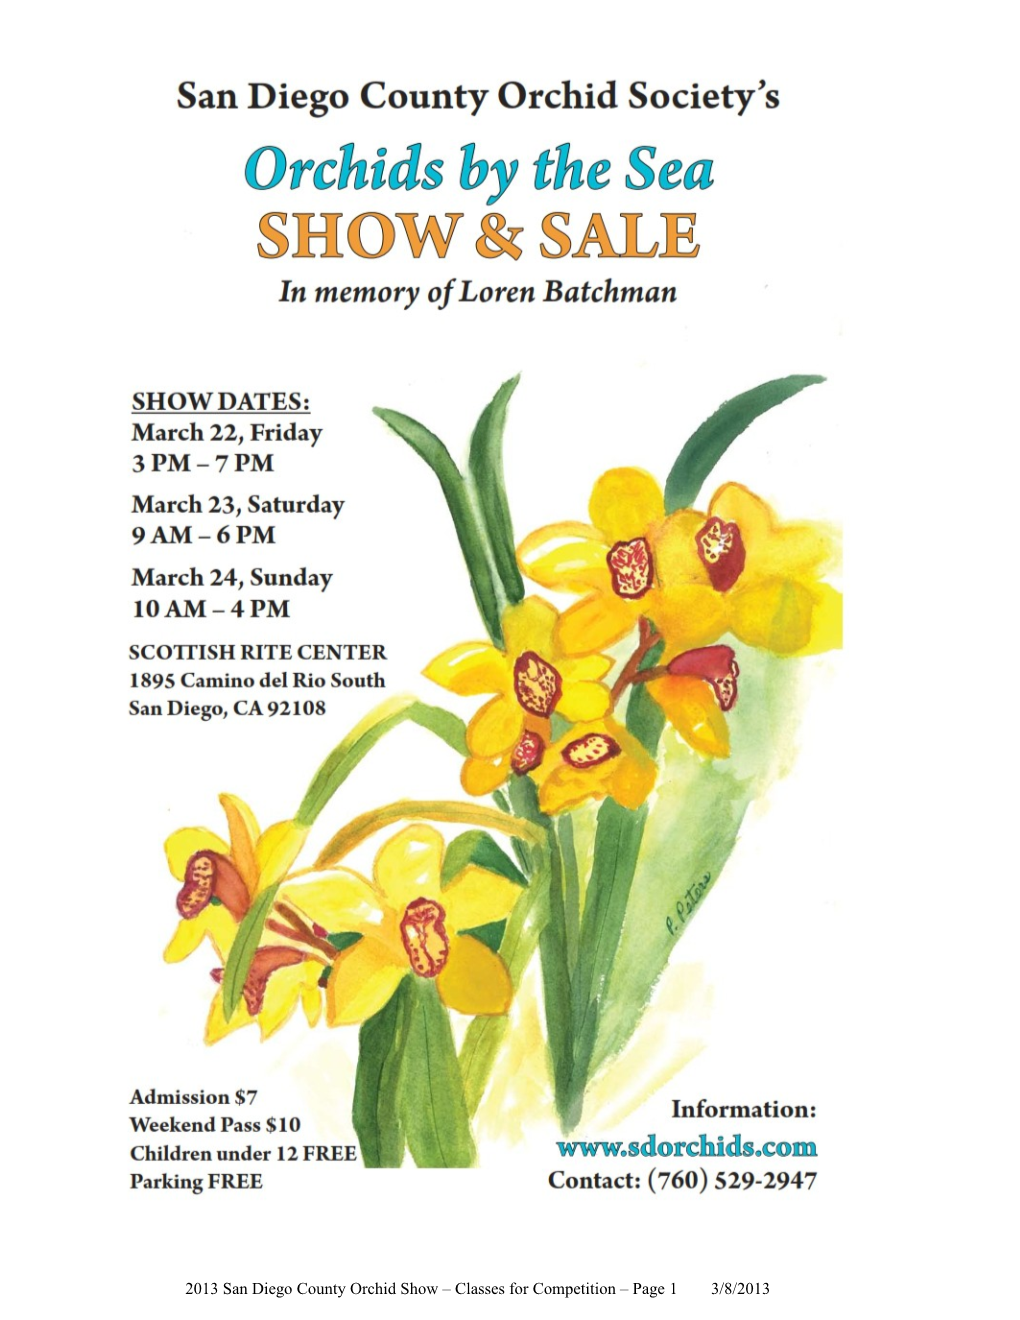 San Diego County Orchid Society Show